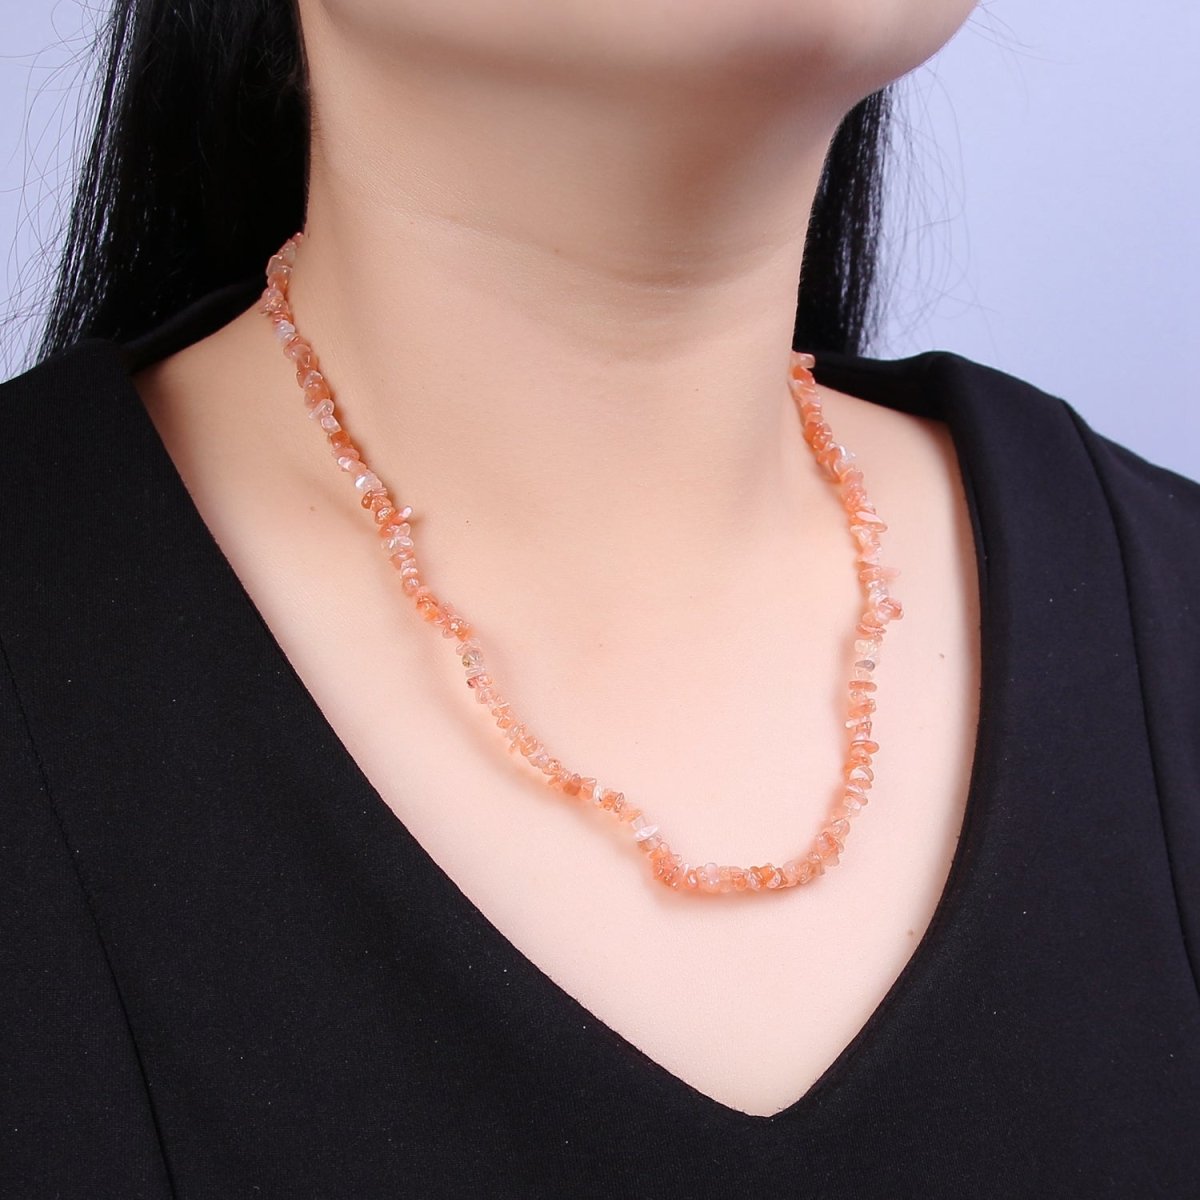 18.2 Inch Natural Orange Carnelian Crystal Stone Bead Necklace with 2" Extender | WA-638 Clearance Pricing - DLUXCA